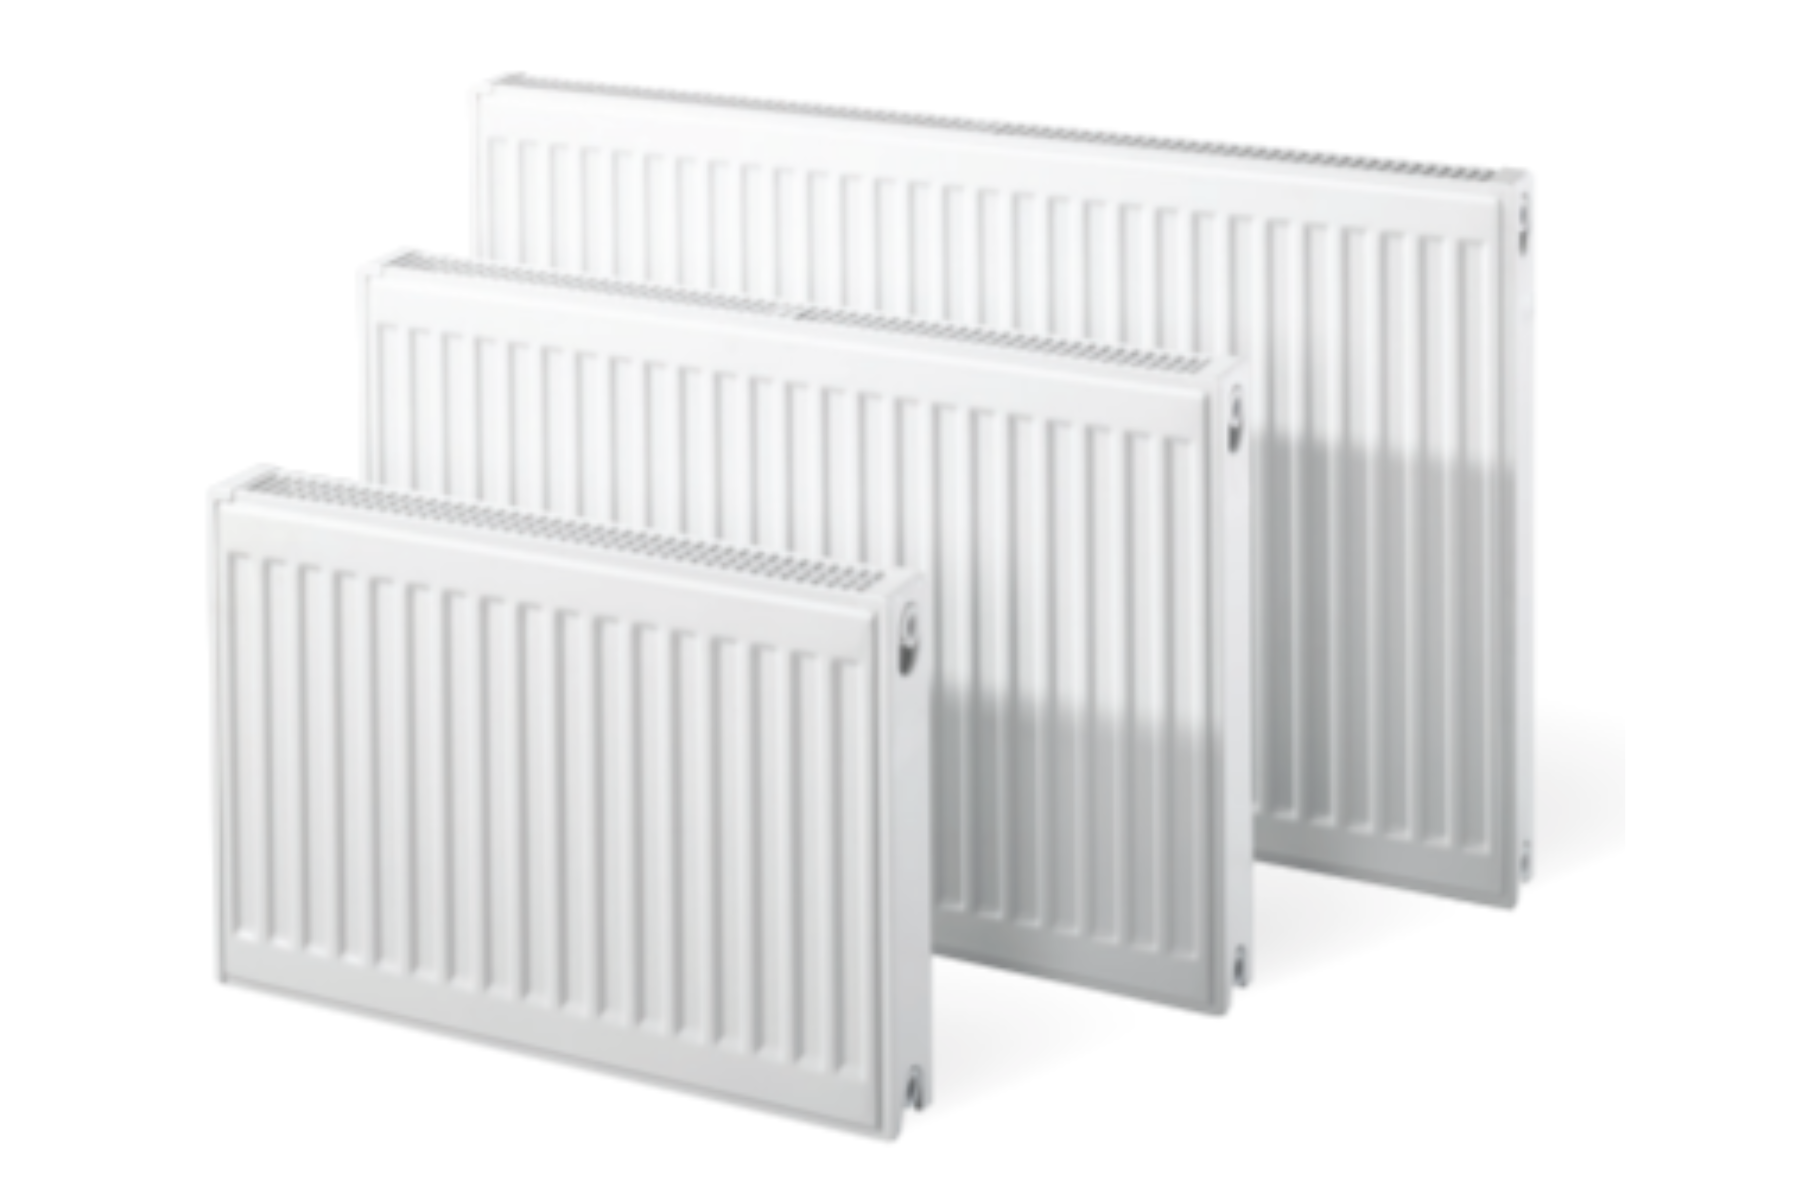 Three Convector Radiator Product Images